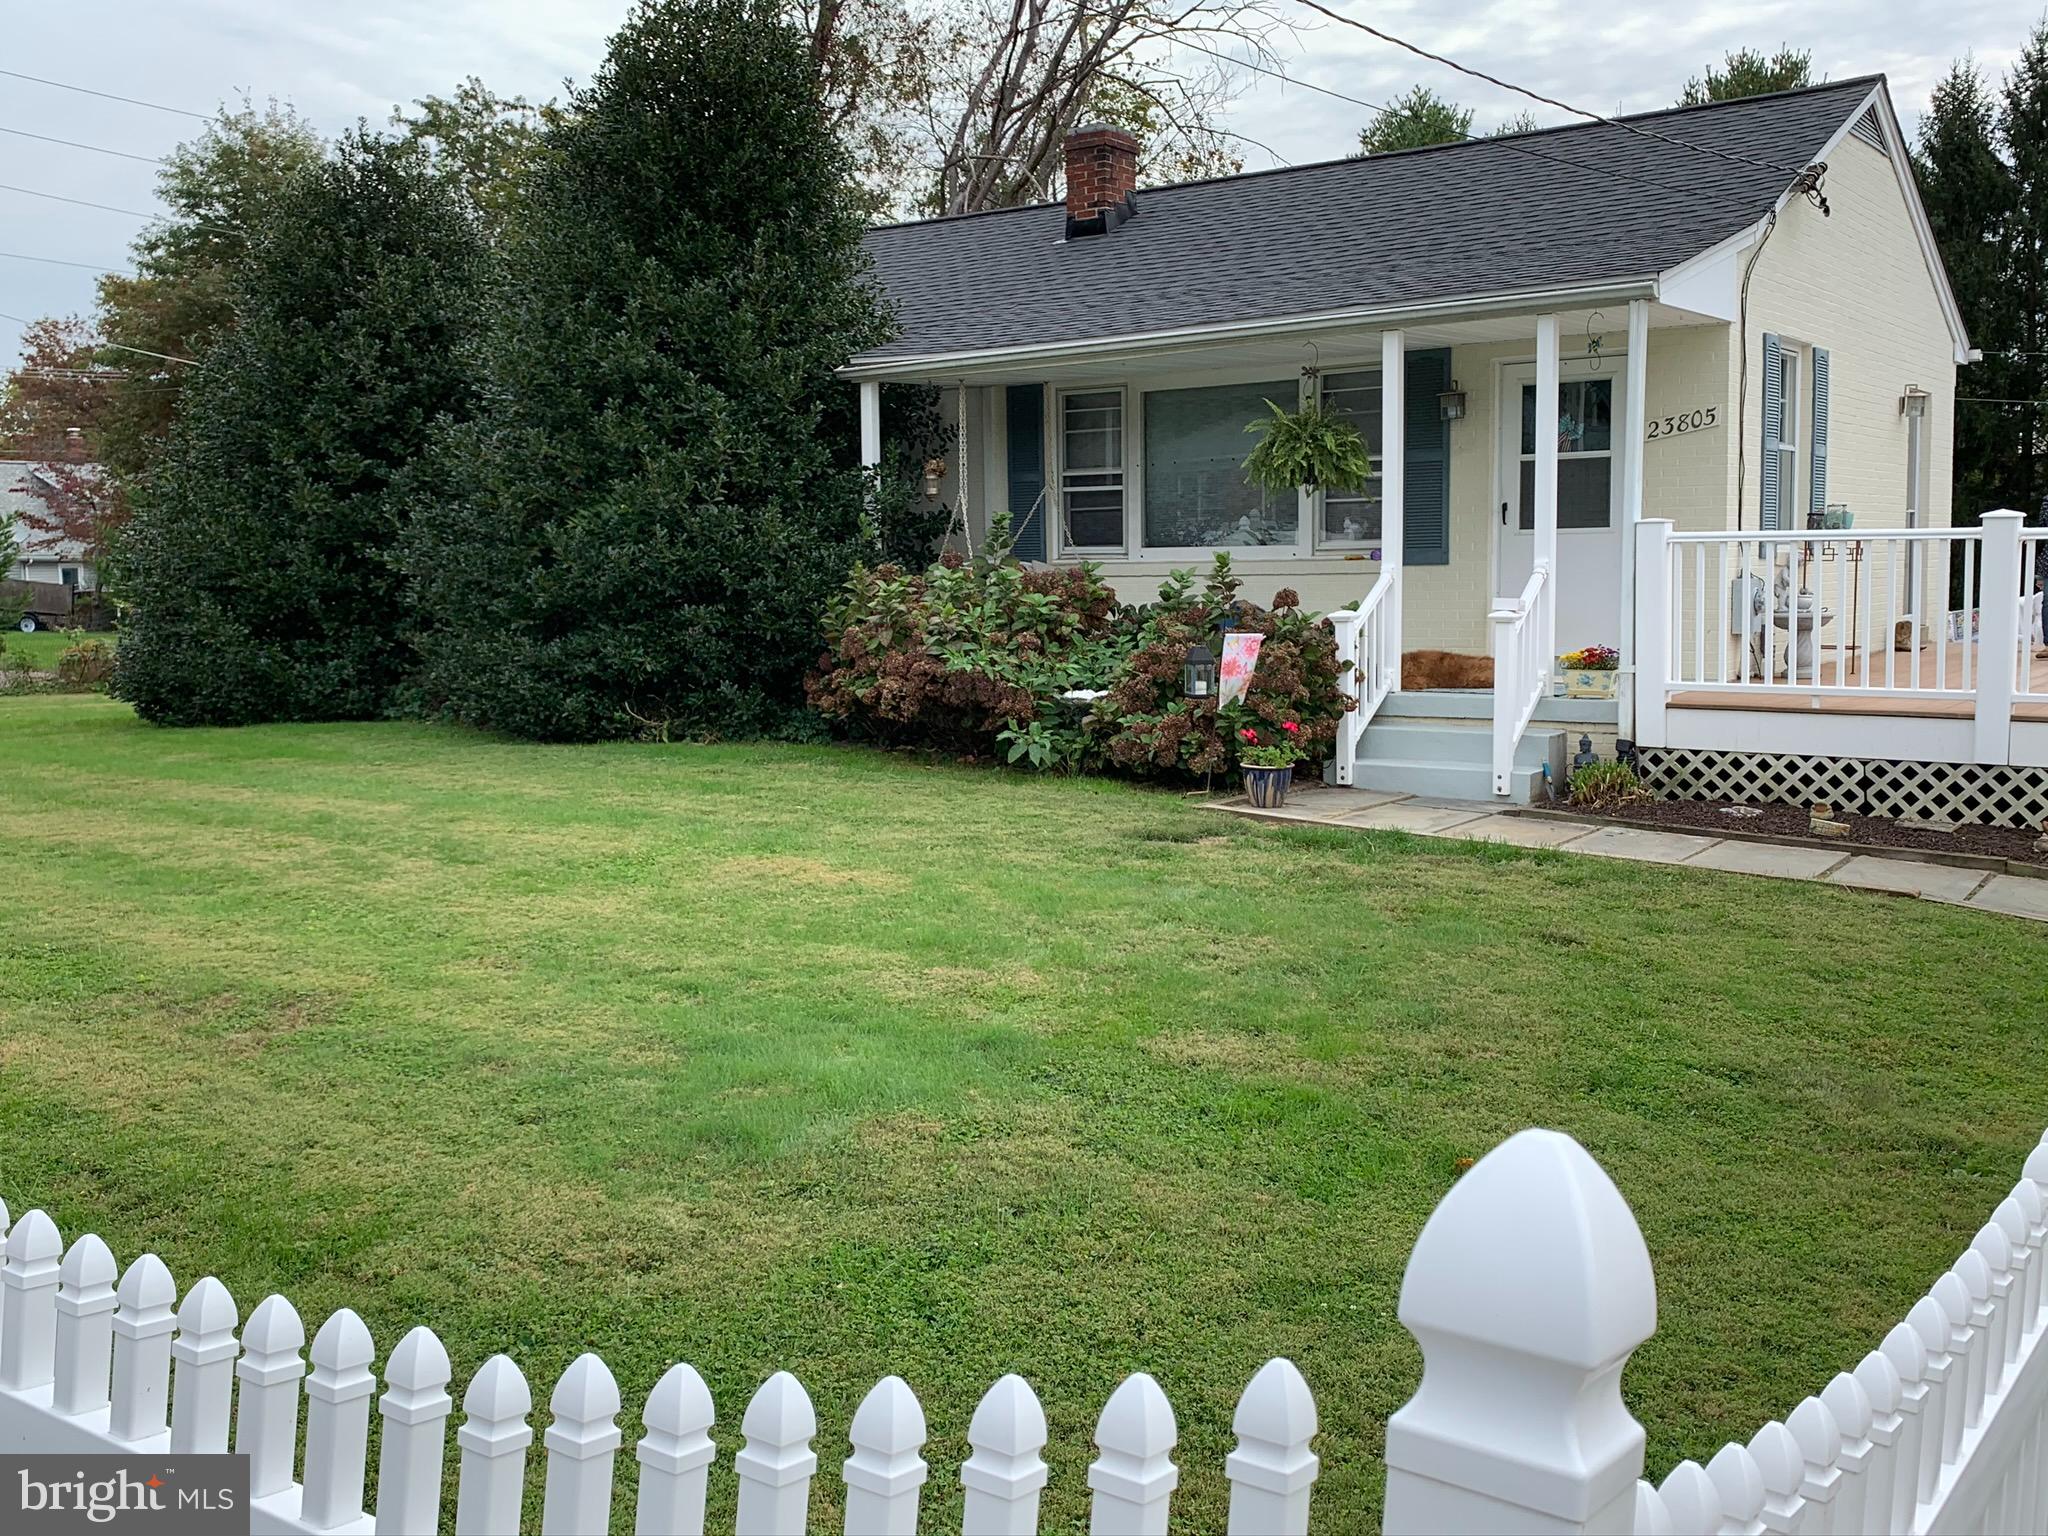 a view of a house with a yard and porch